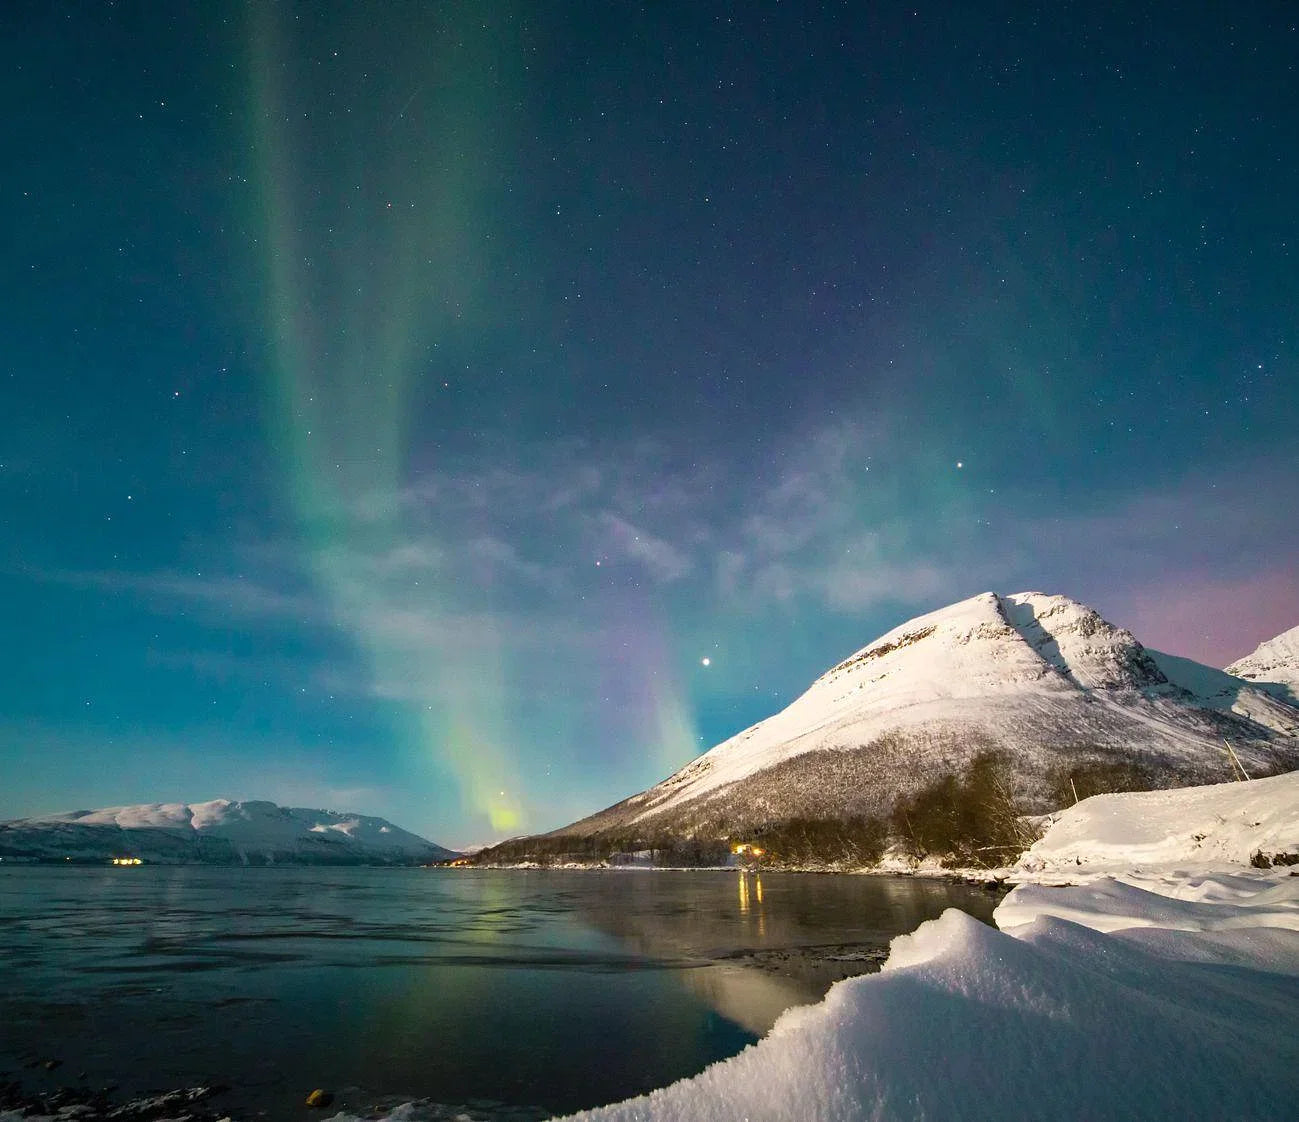 Northern lights in the sky above the water and snowy mountains in Tromso Norway on a small group trip.